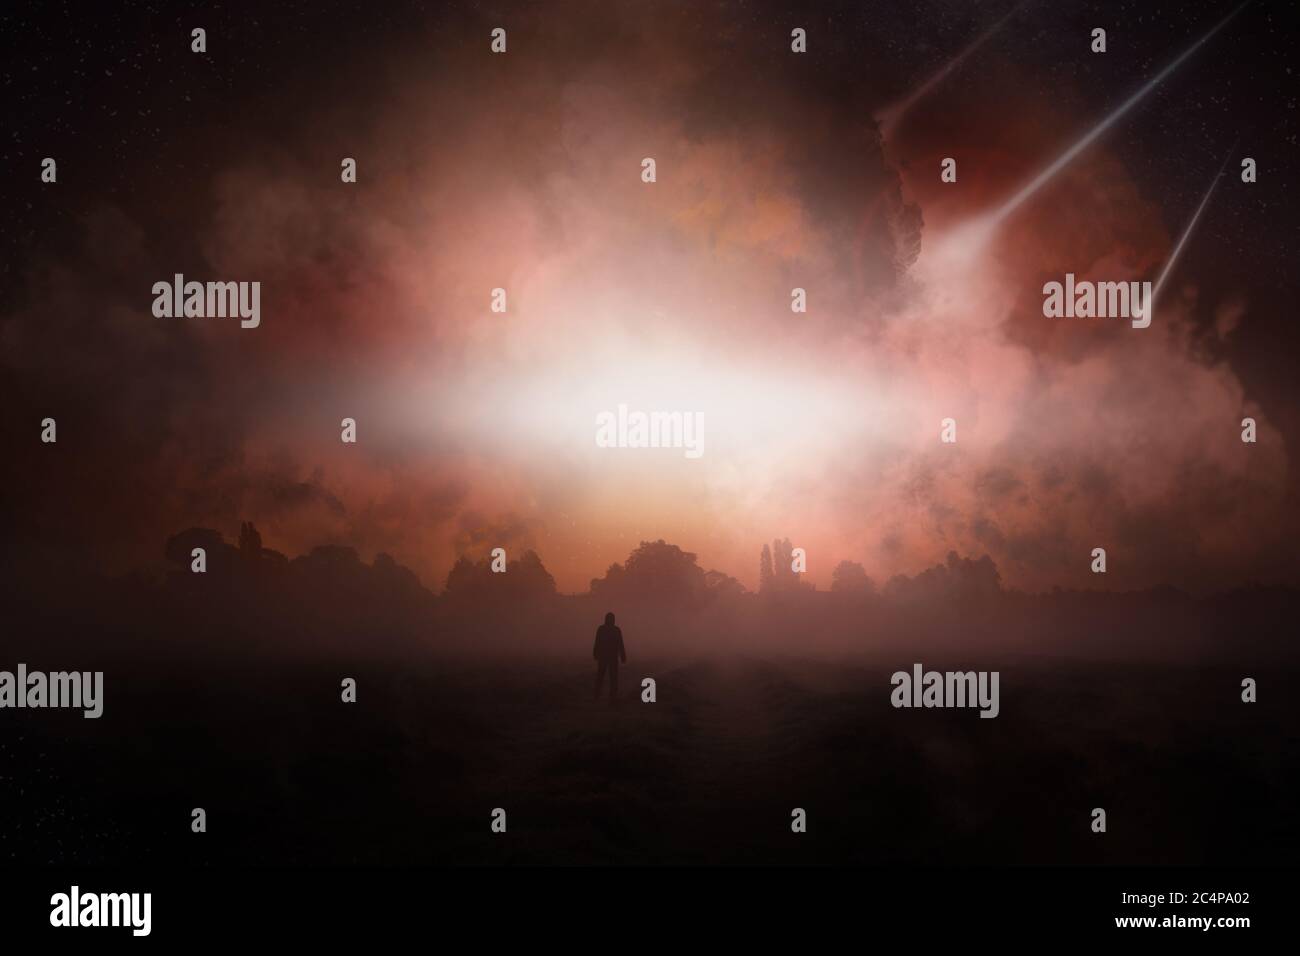 A post apocalypse scene showing a man standing, looking at asteroid falling from the sky. Stock Photo